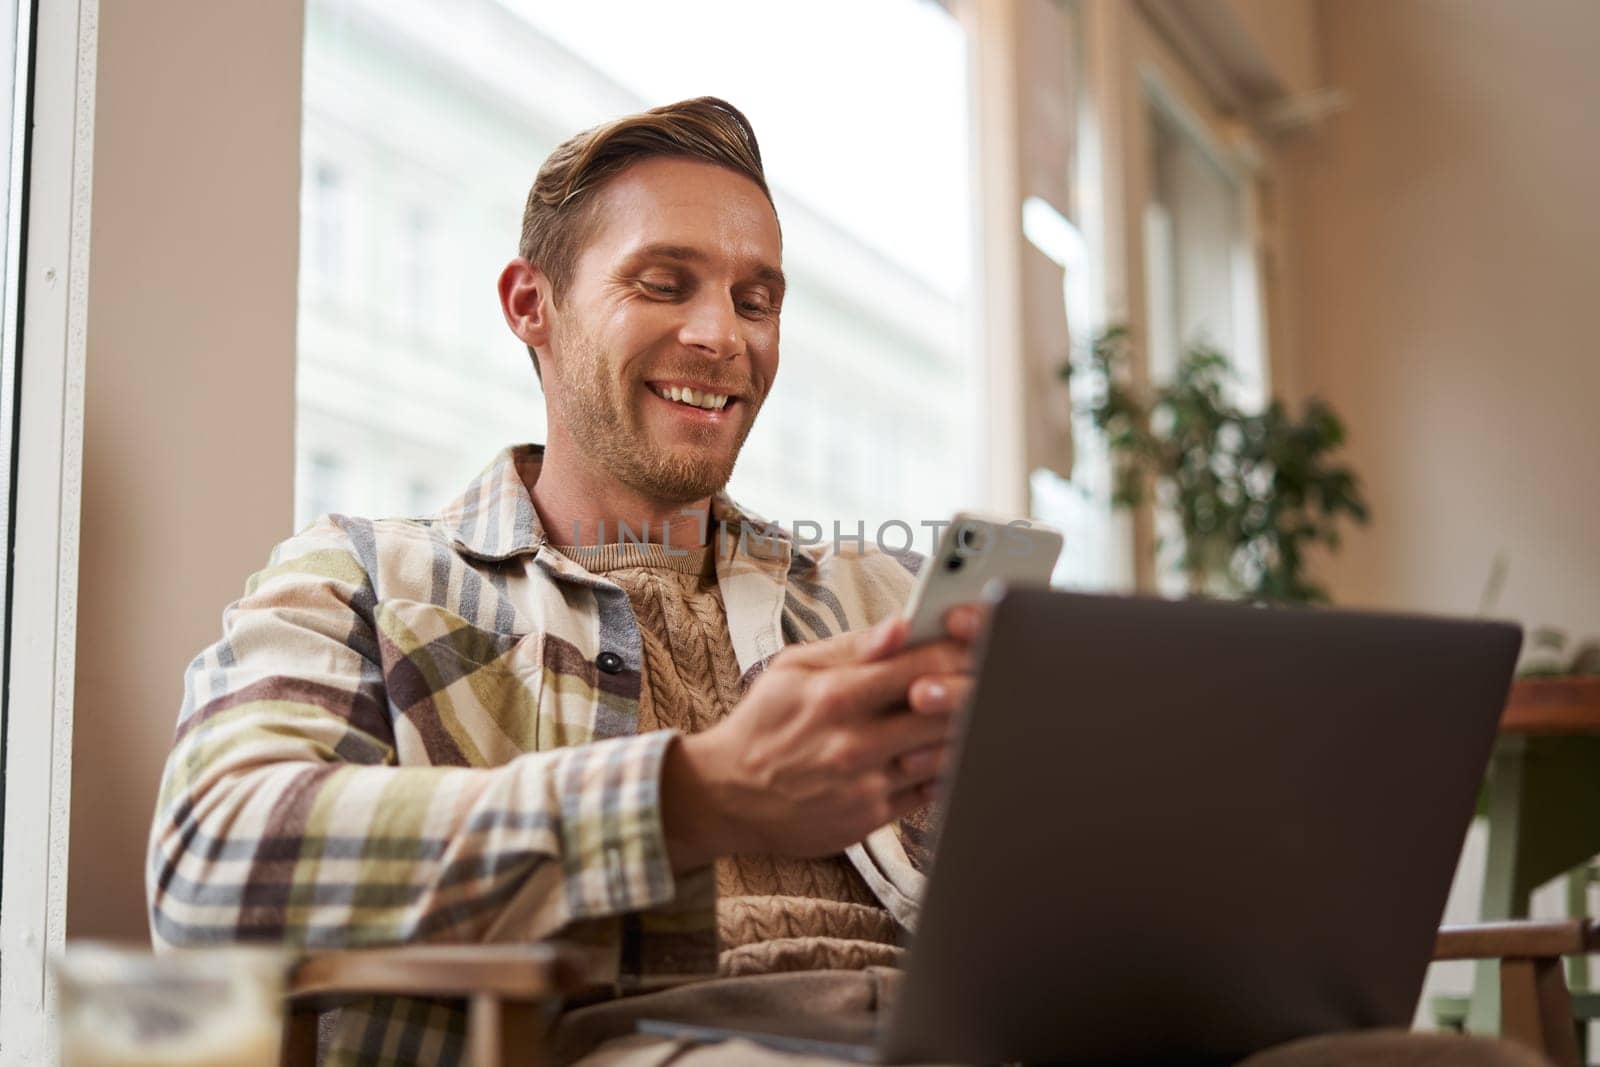 Close up portrait of handsome smiling man with laptop, cafe visitor sitting in chair, using smartphone, looking happy, messaging with friends while enjoying cup of coffee.